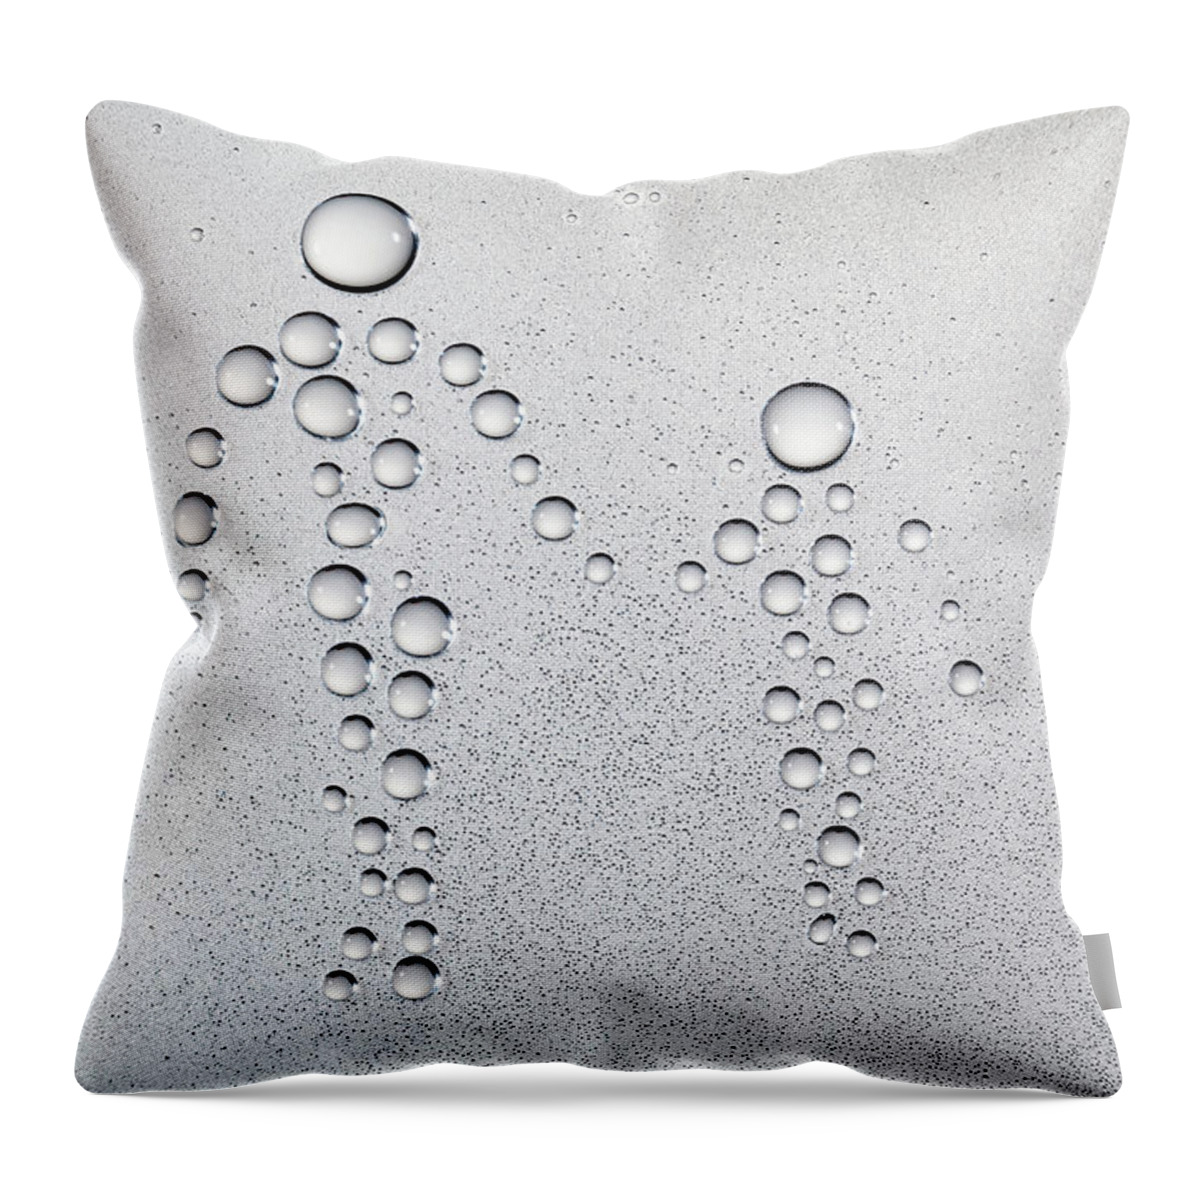 White Background Throw Pillow featuring the photograph Droplets Of Water That Shaped Walking by Hiroshi Watanabe